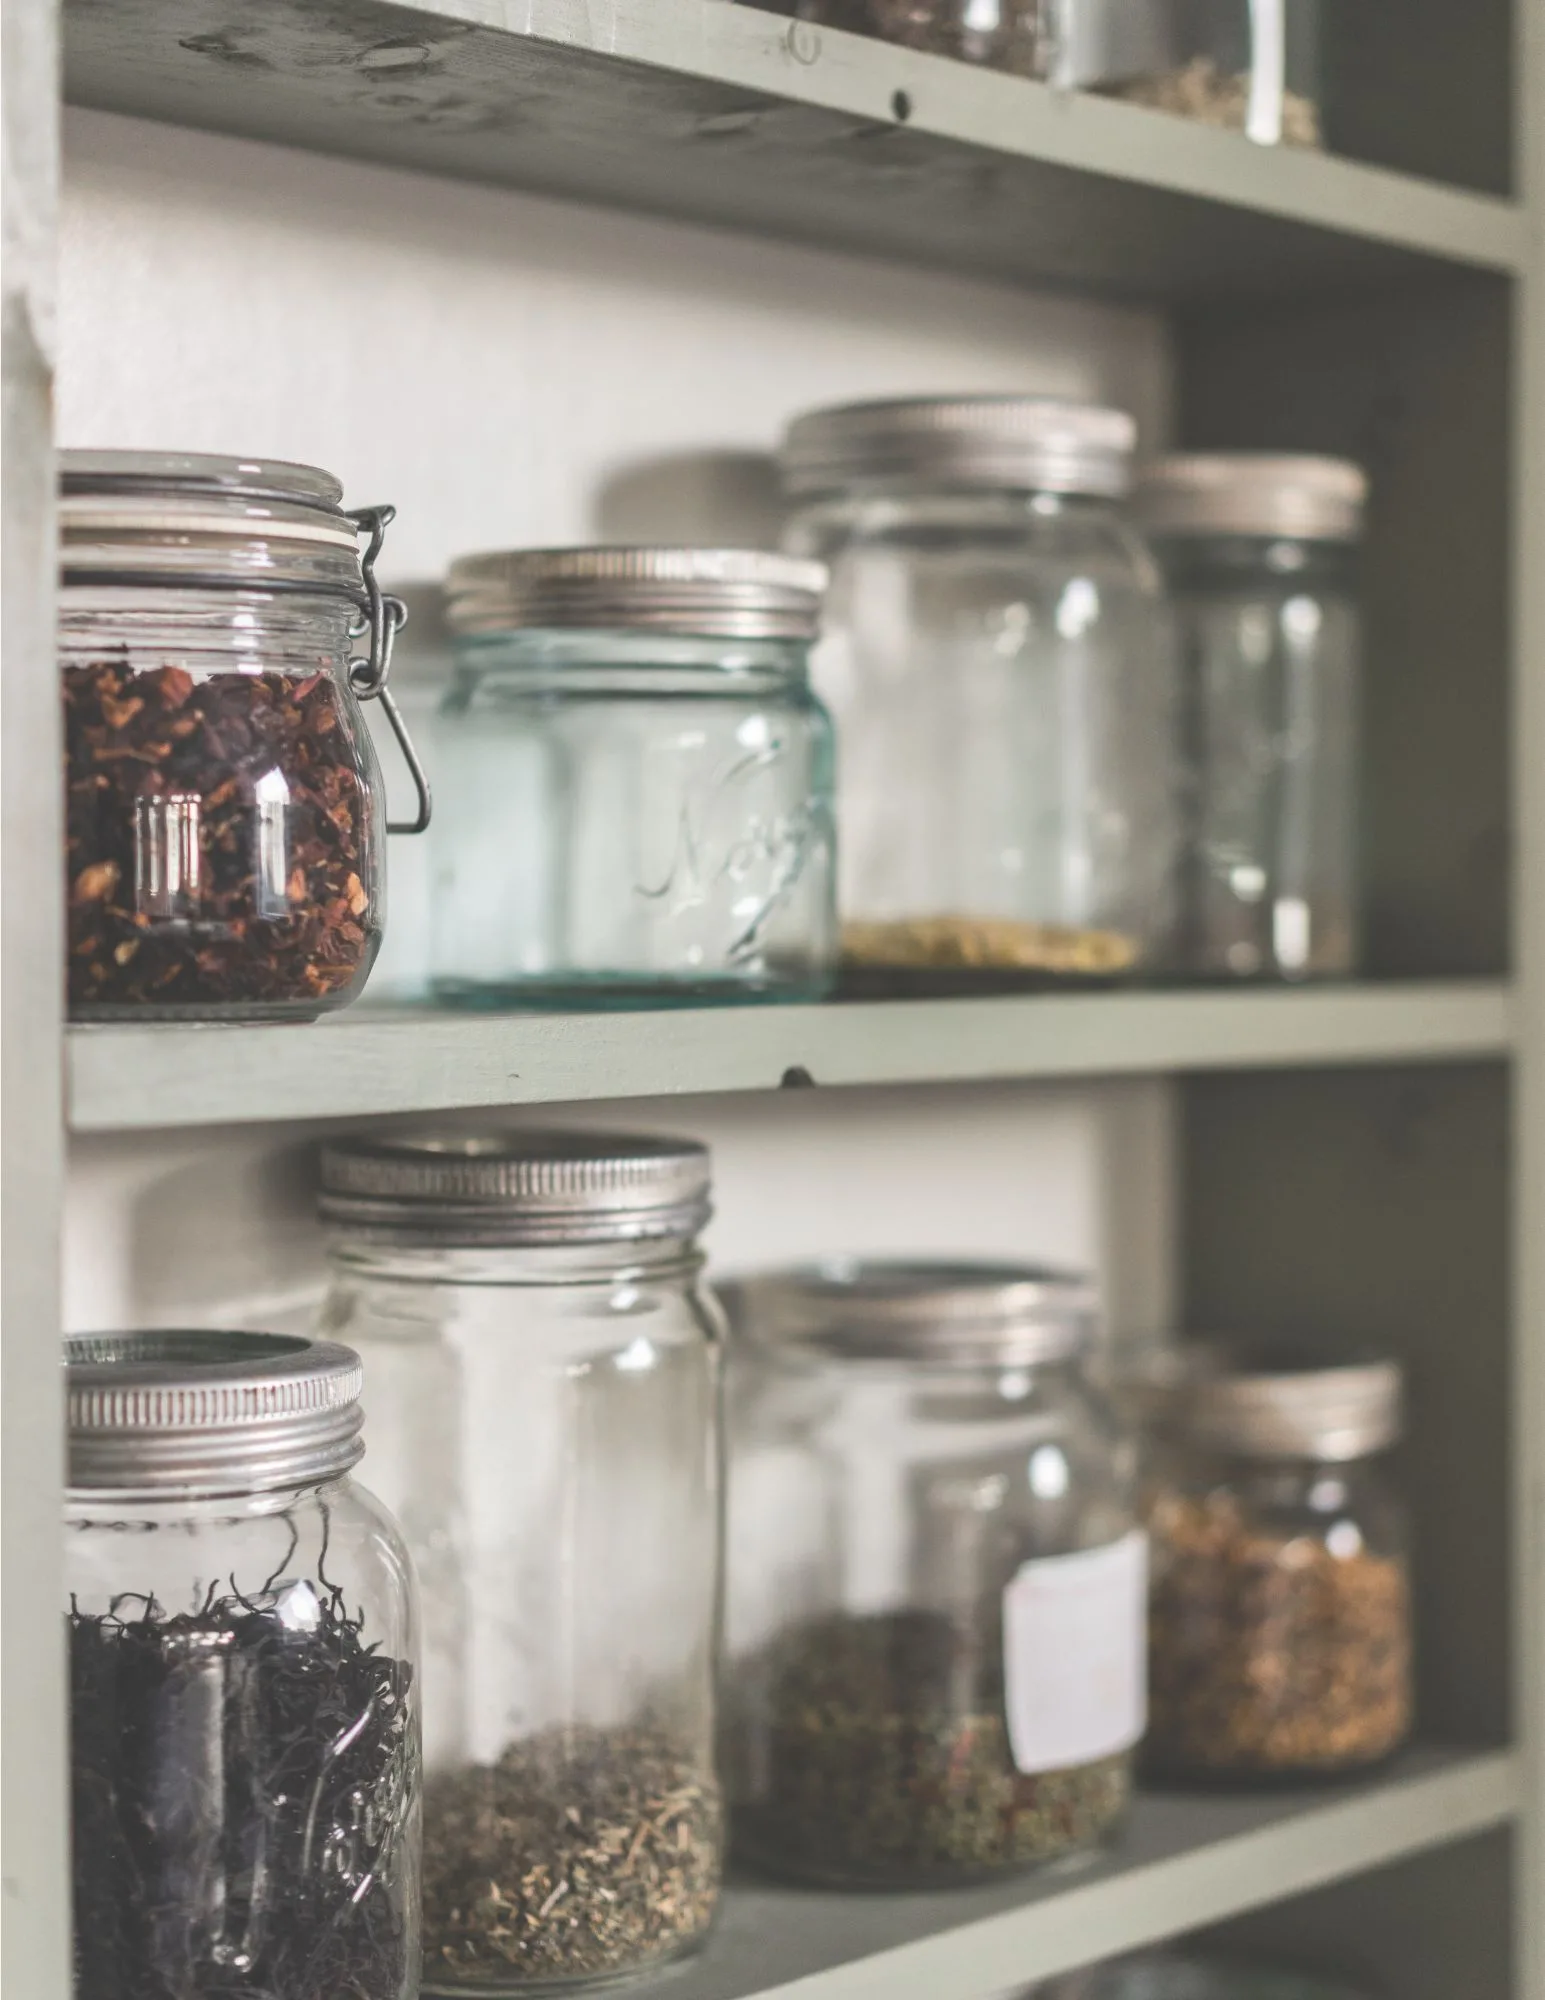 Quick Guide: How to Stock the Pantry using a Kitchen Journal